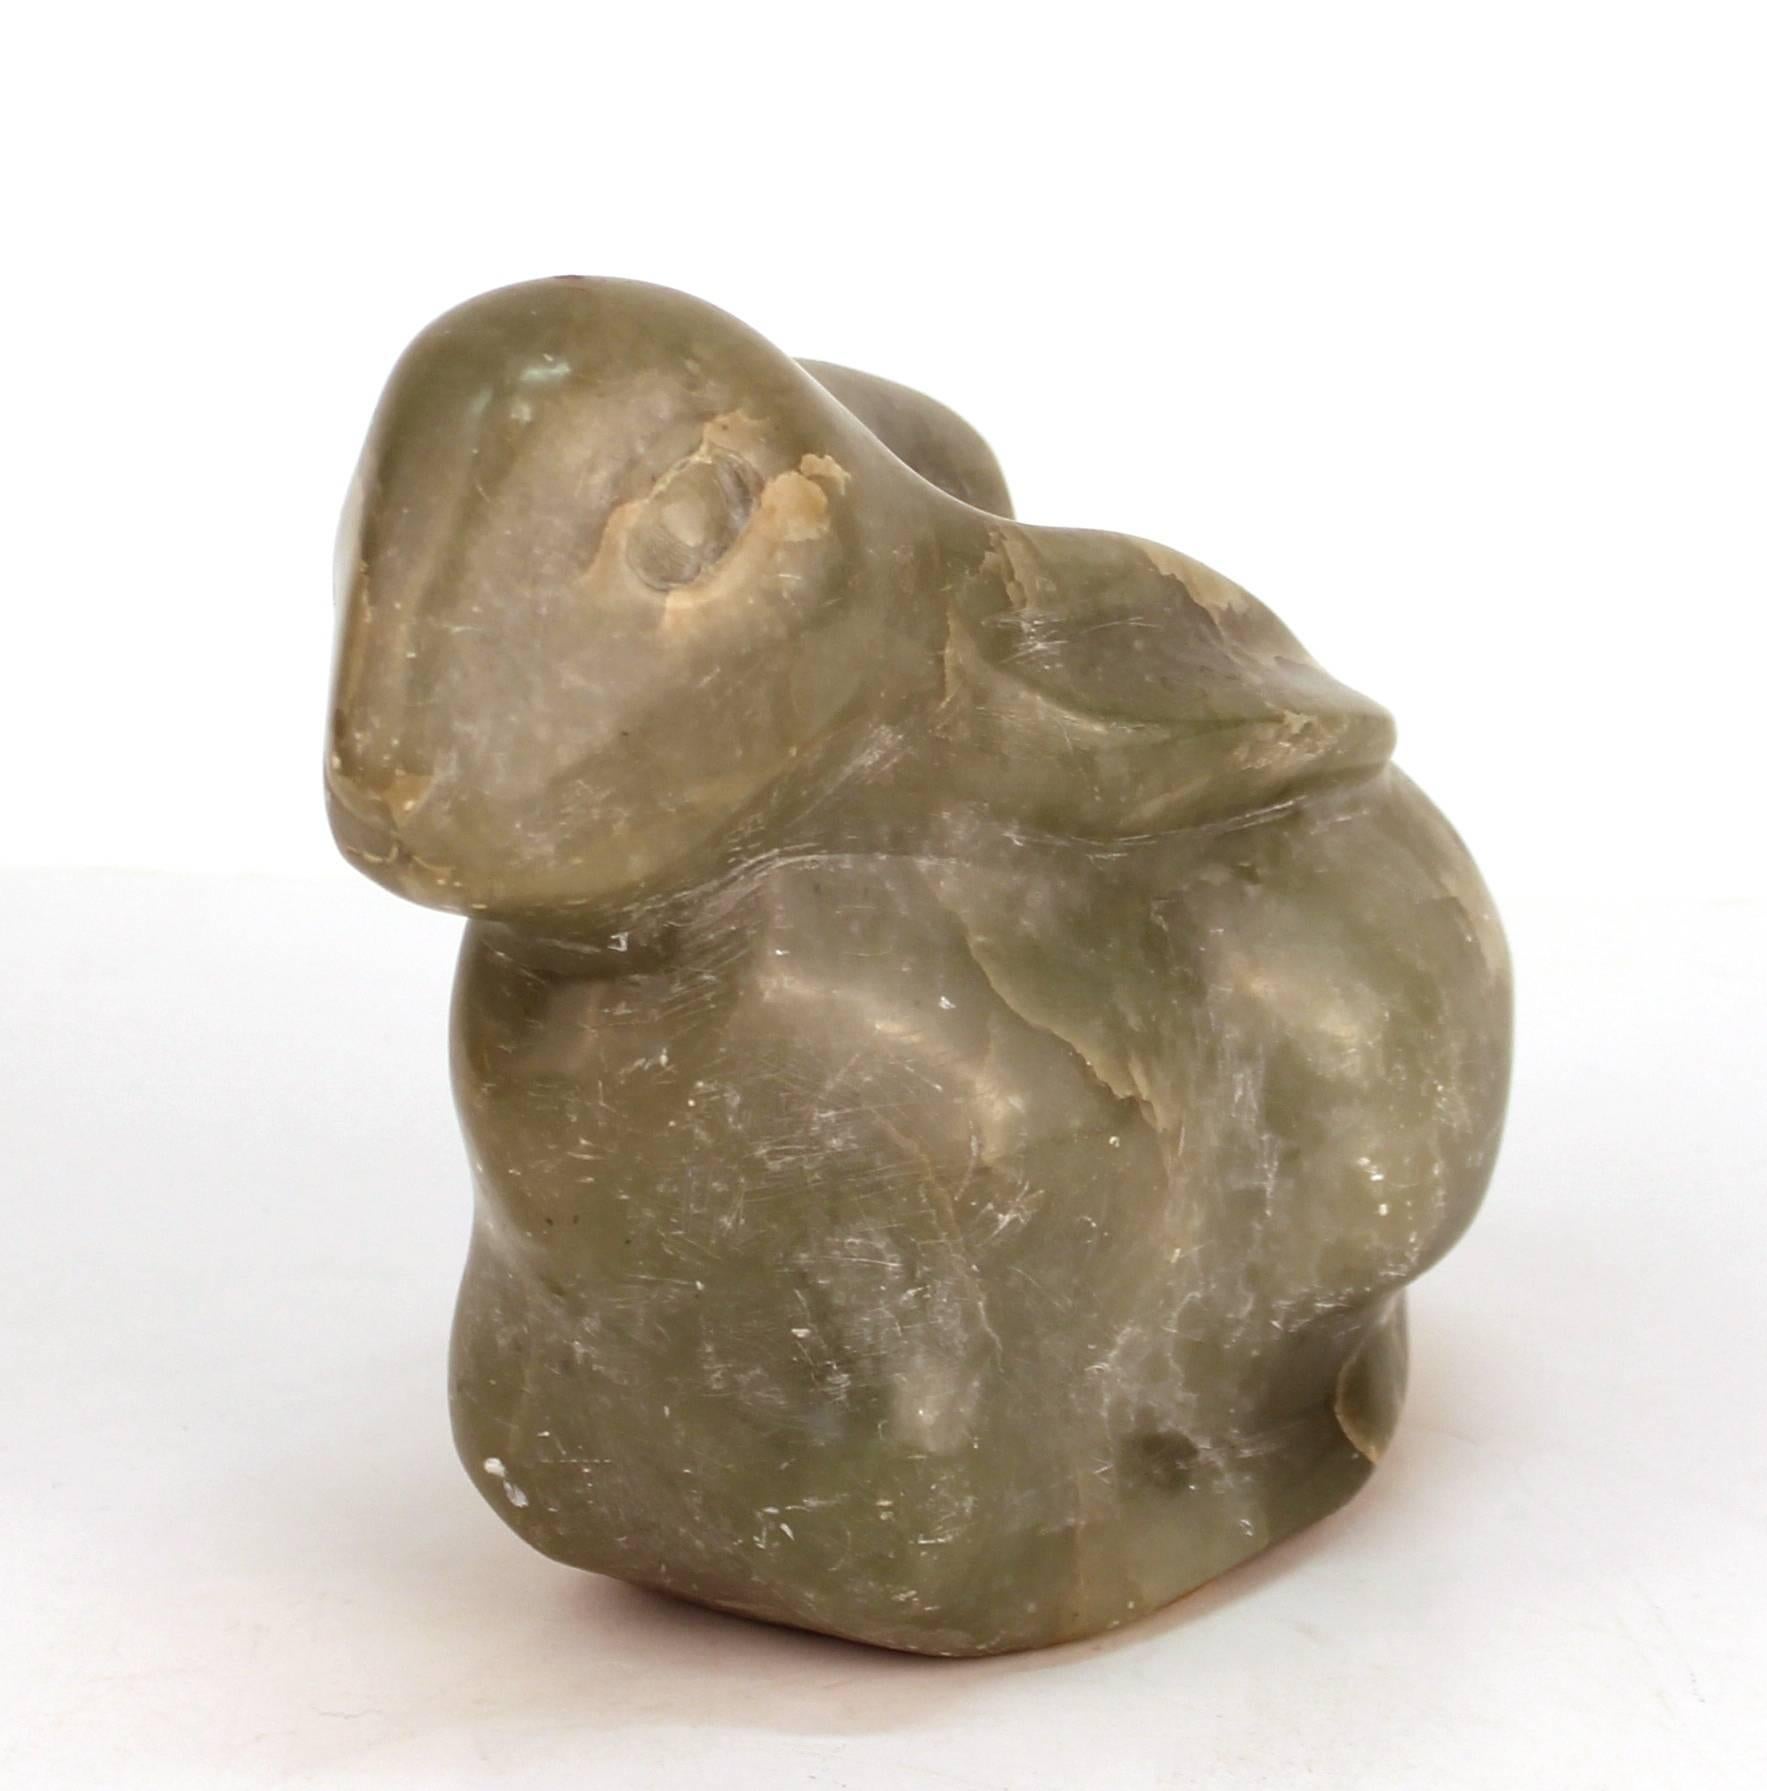 A Mid-Century Modern sculpted figure of a rabbit, made of green quartzite. The piece is unsigned and in good vintage condition with age appropriate wear and use.